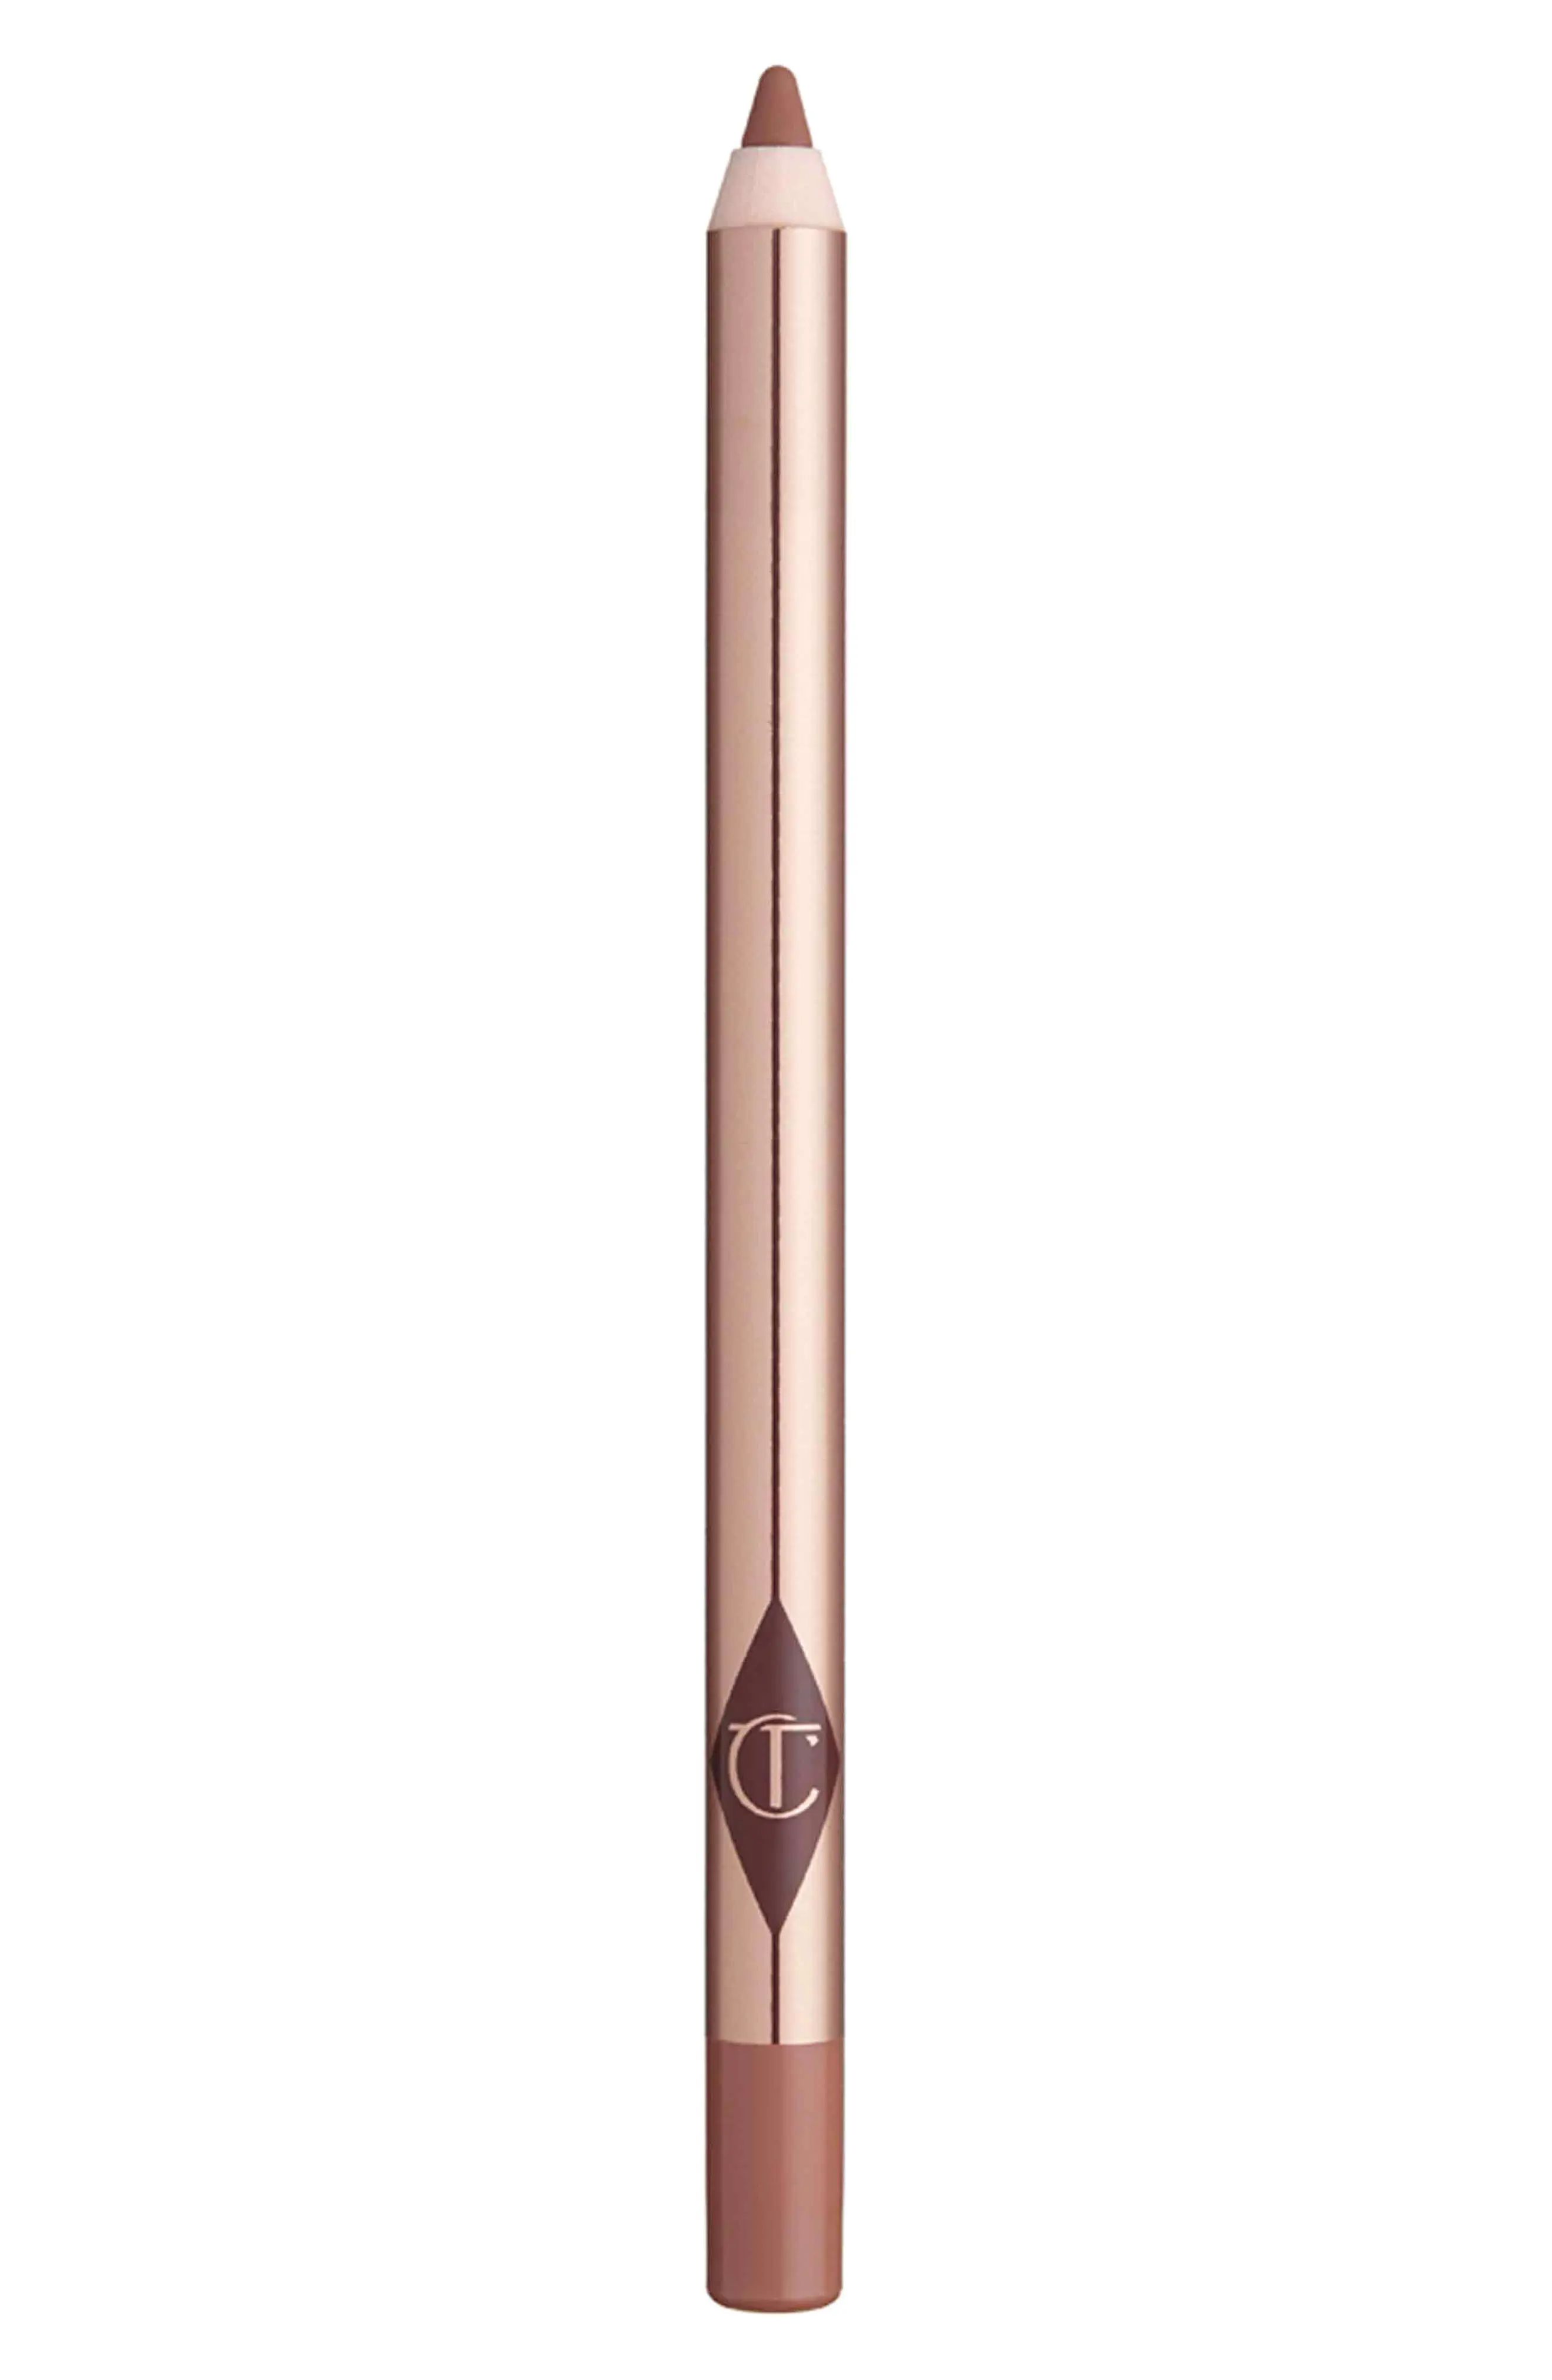 Charlotte Tilbury Lip Cheat Lip Liner in Iconic Nude at Nordstrom | Nordstrom